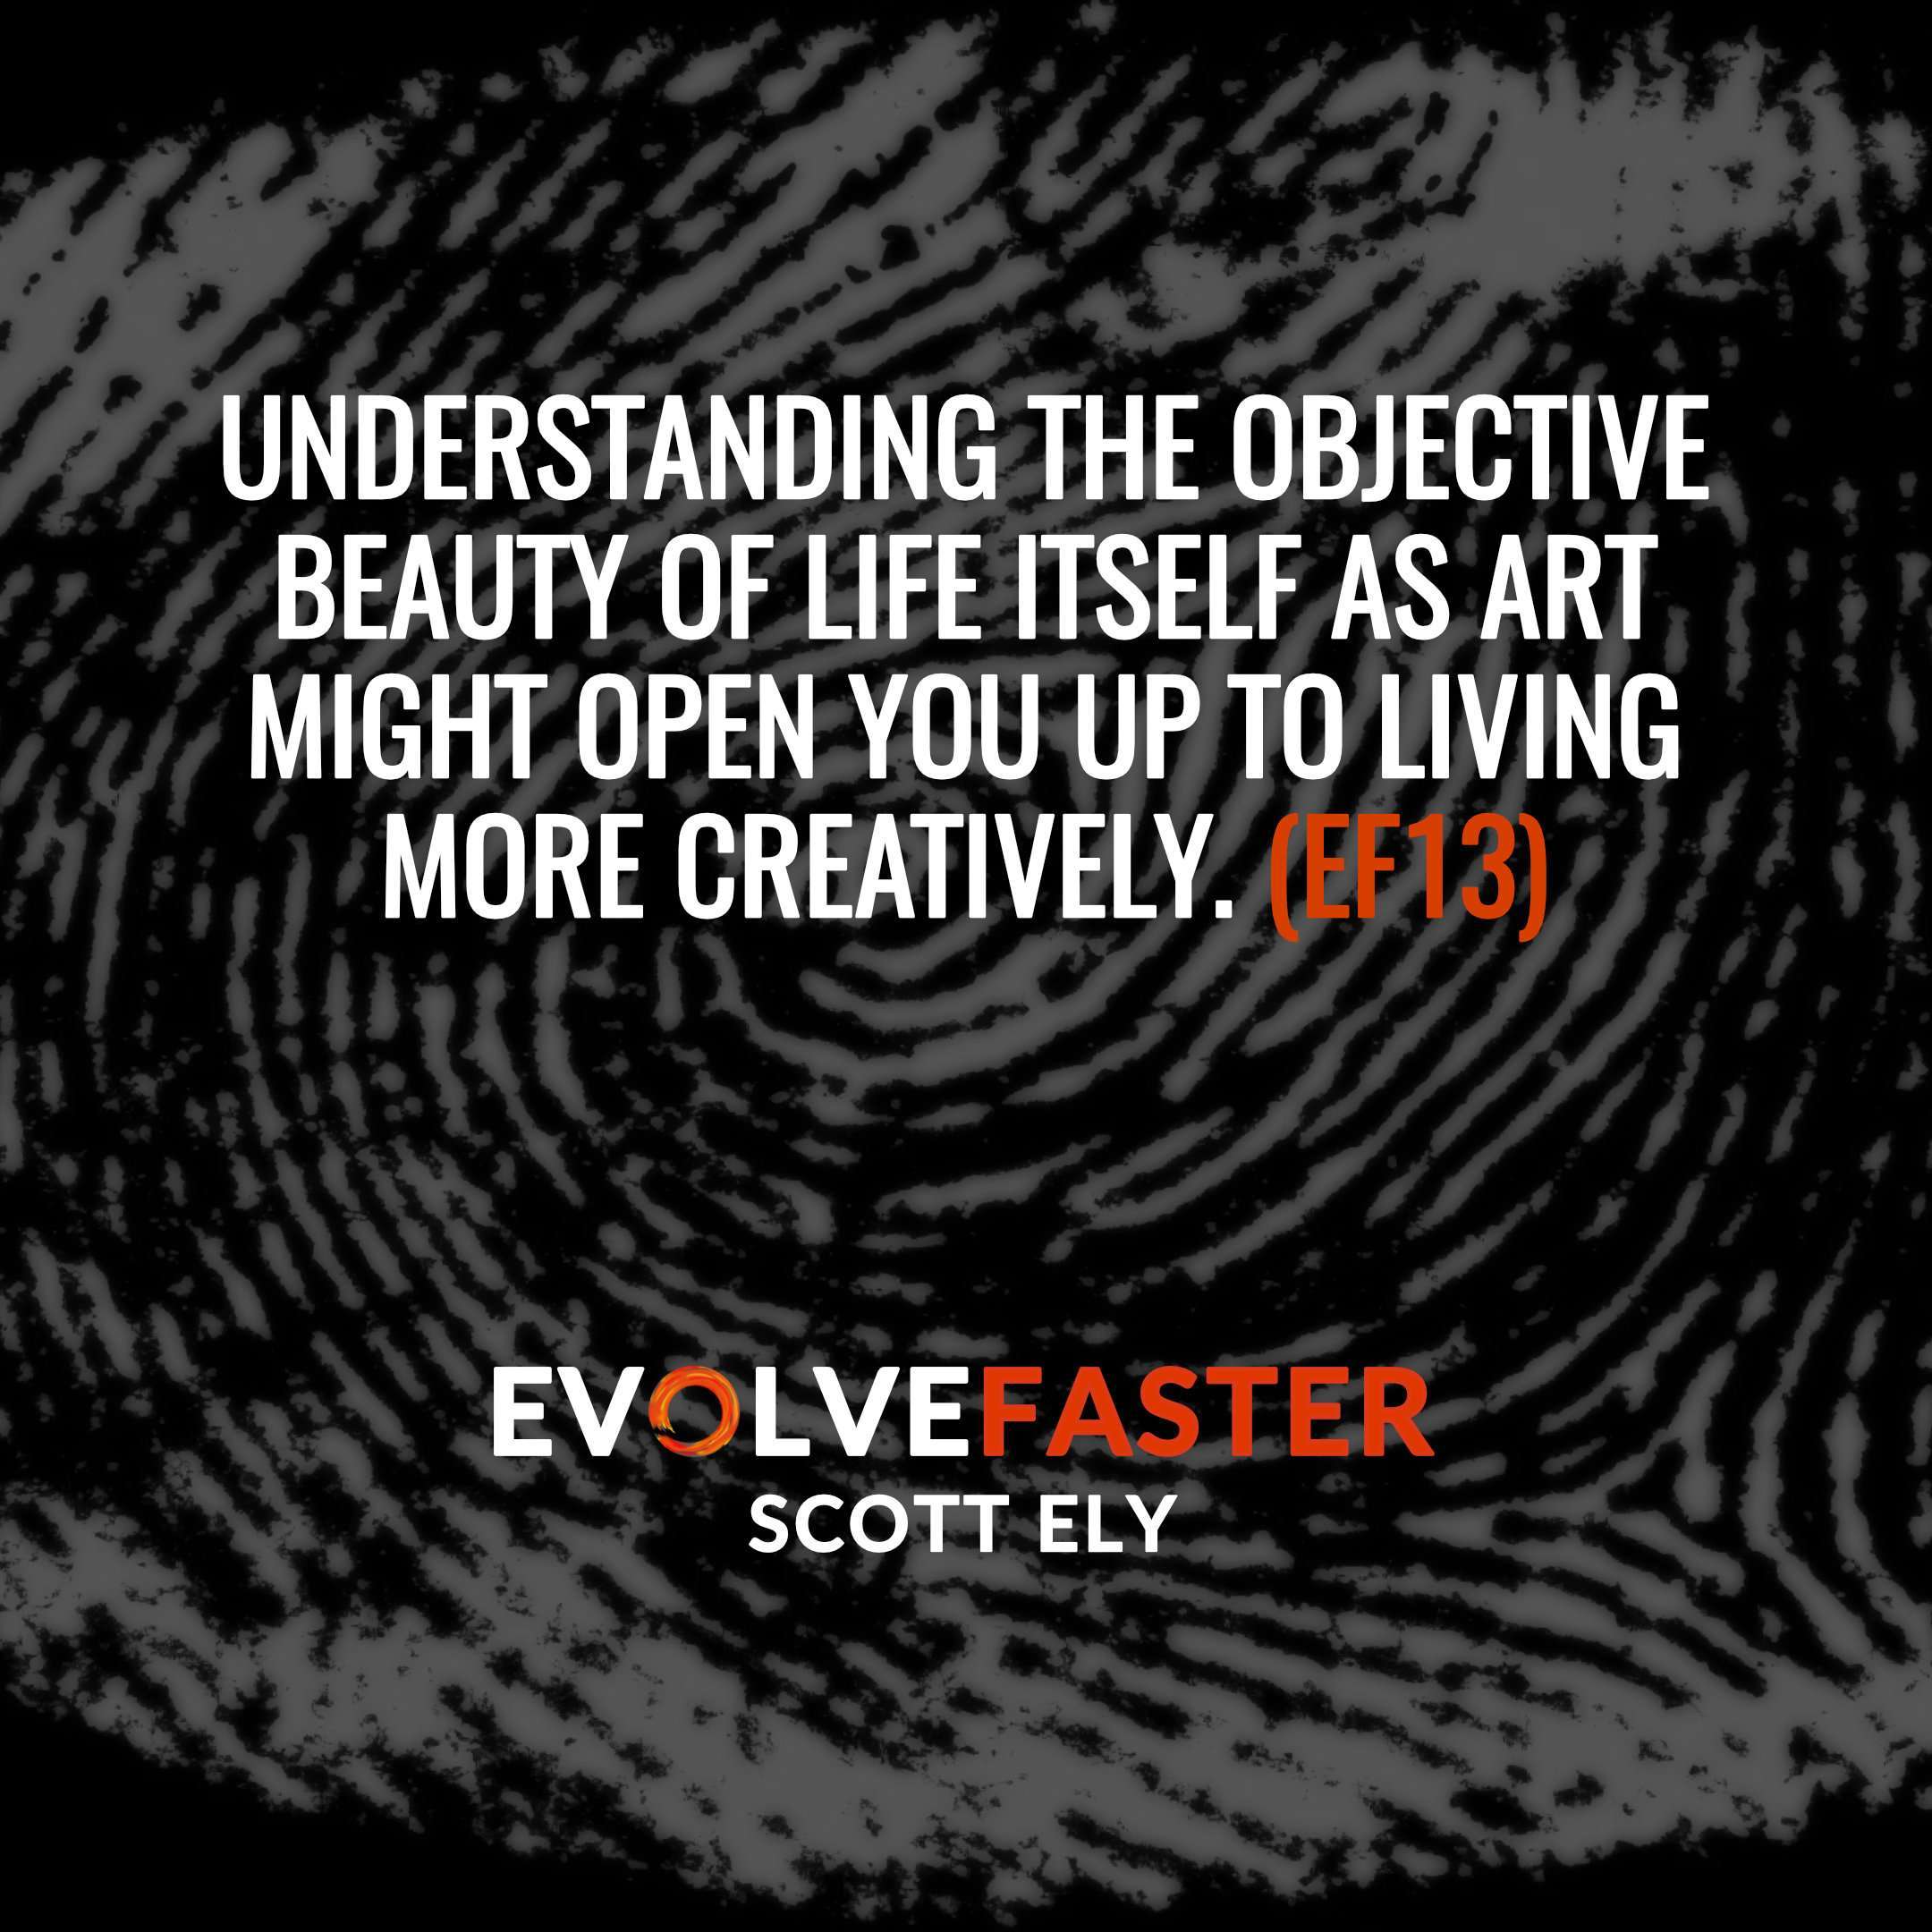 (EF13) S1-E11: The Bloody Fingerprint of Creativity The Evolve Faster Podcast with Scott Ely Season One